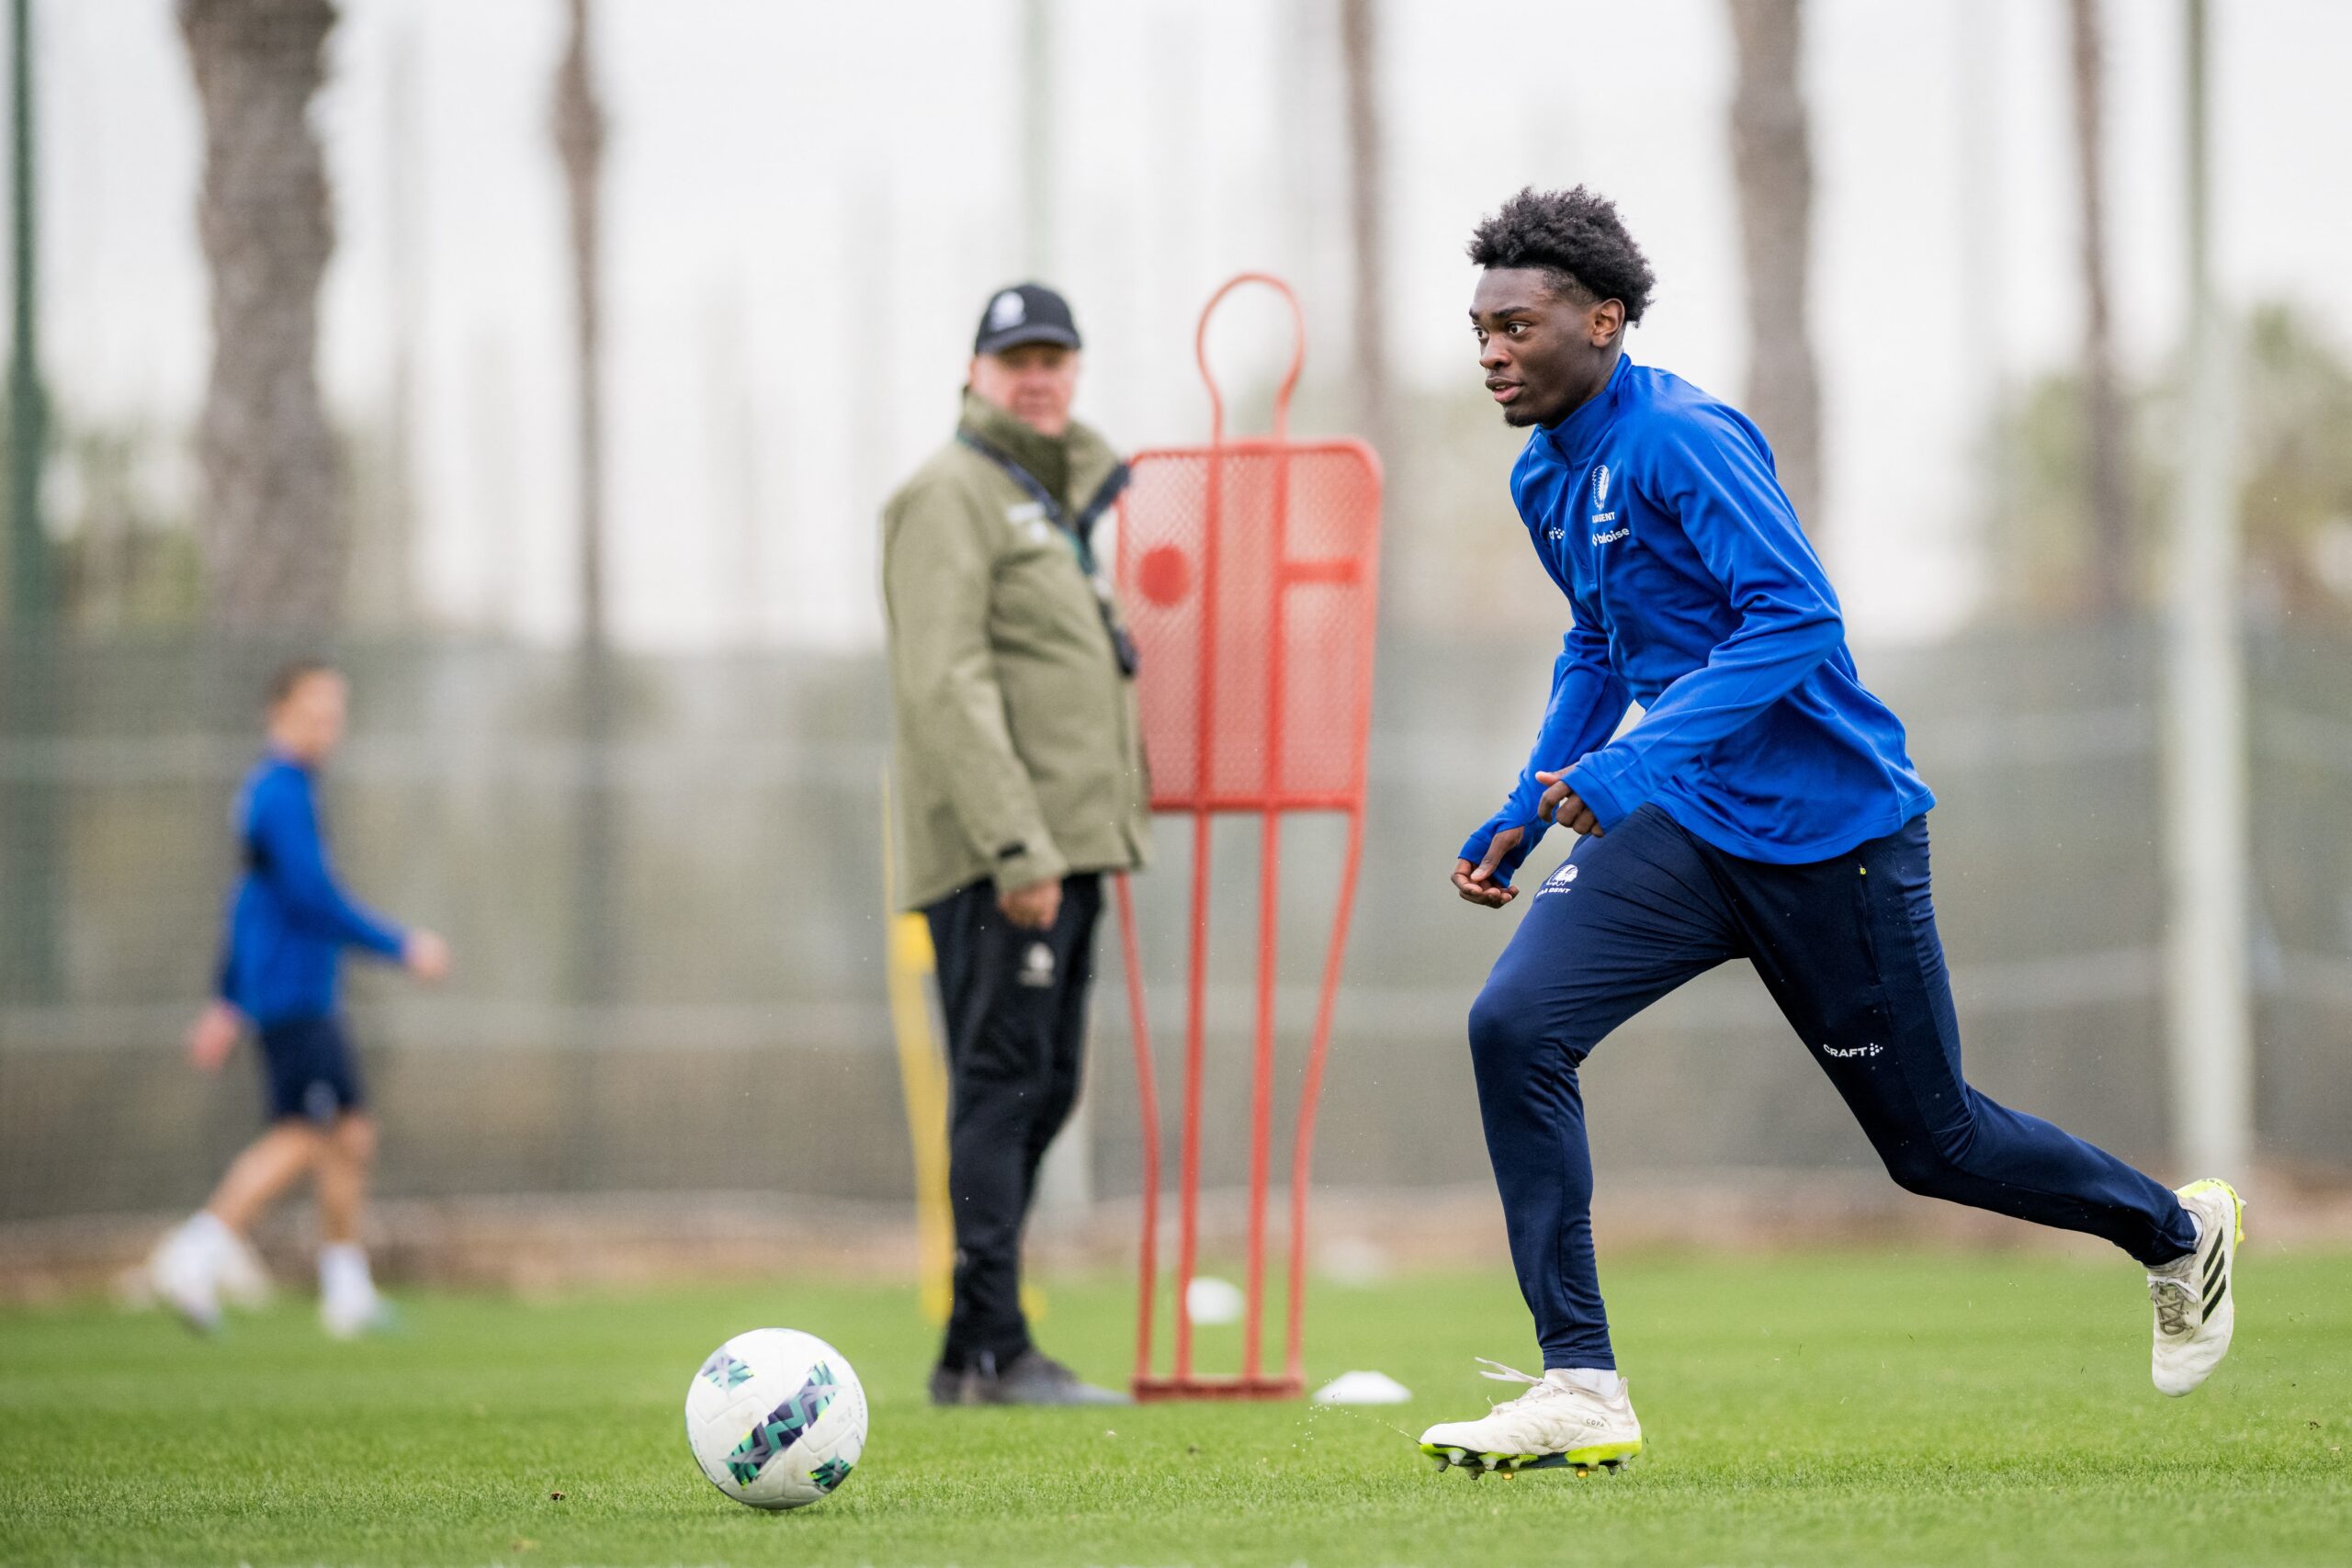 Gent's Jorthy Mokio pictured in action during the winter training camp of Belgian soccer team KAA Gent, in Oliva, Spain, Tuesday 09 January 2024.